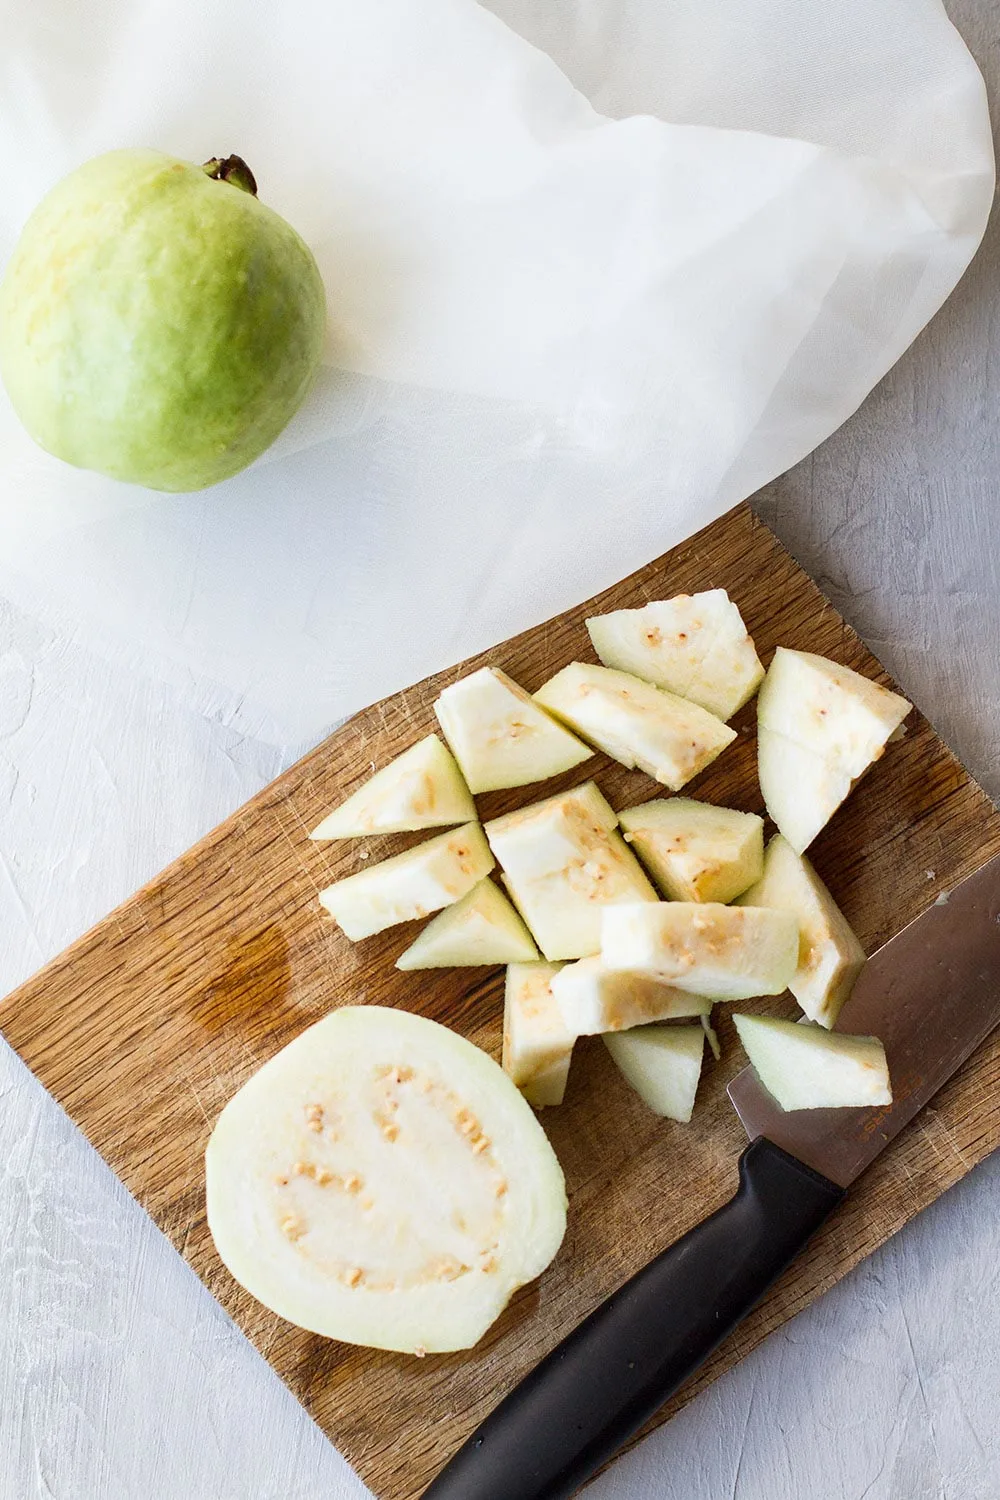 A cutting board with a guava cut open and diced.